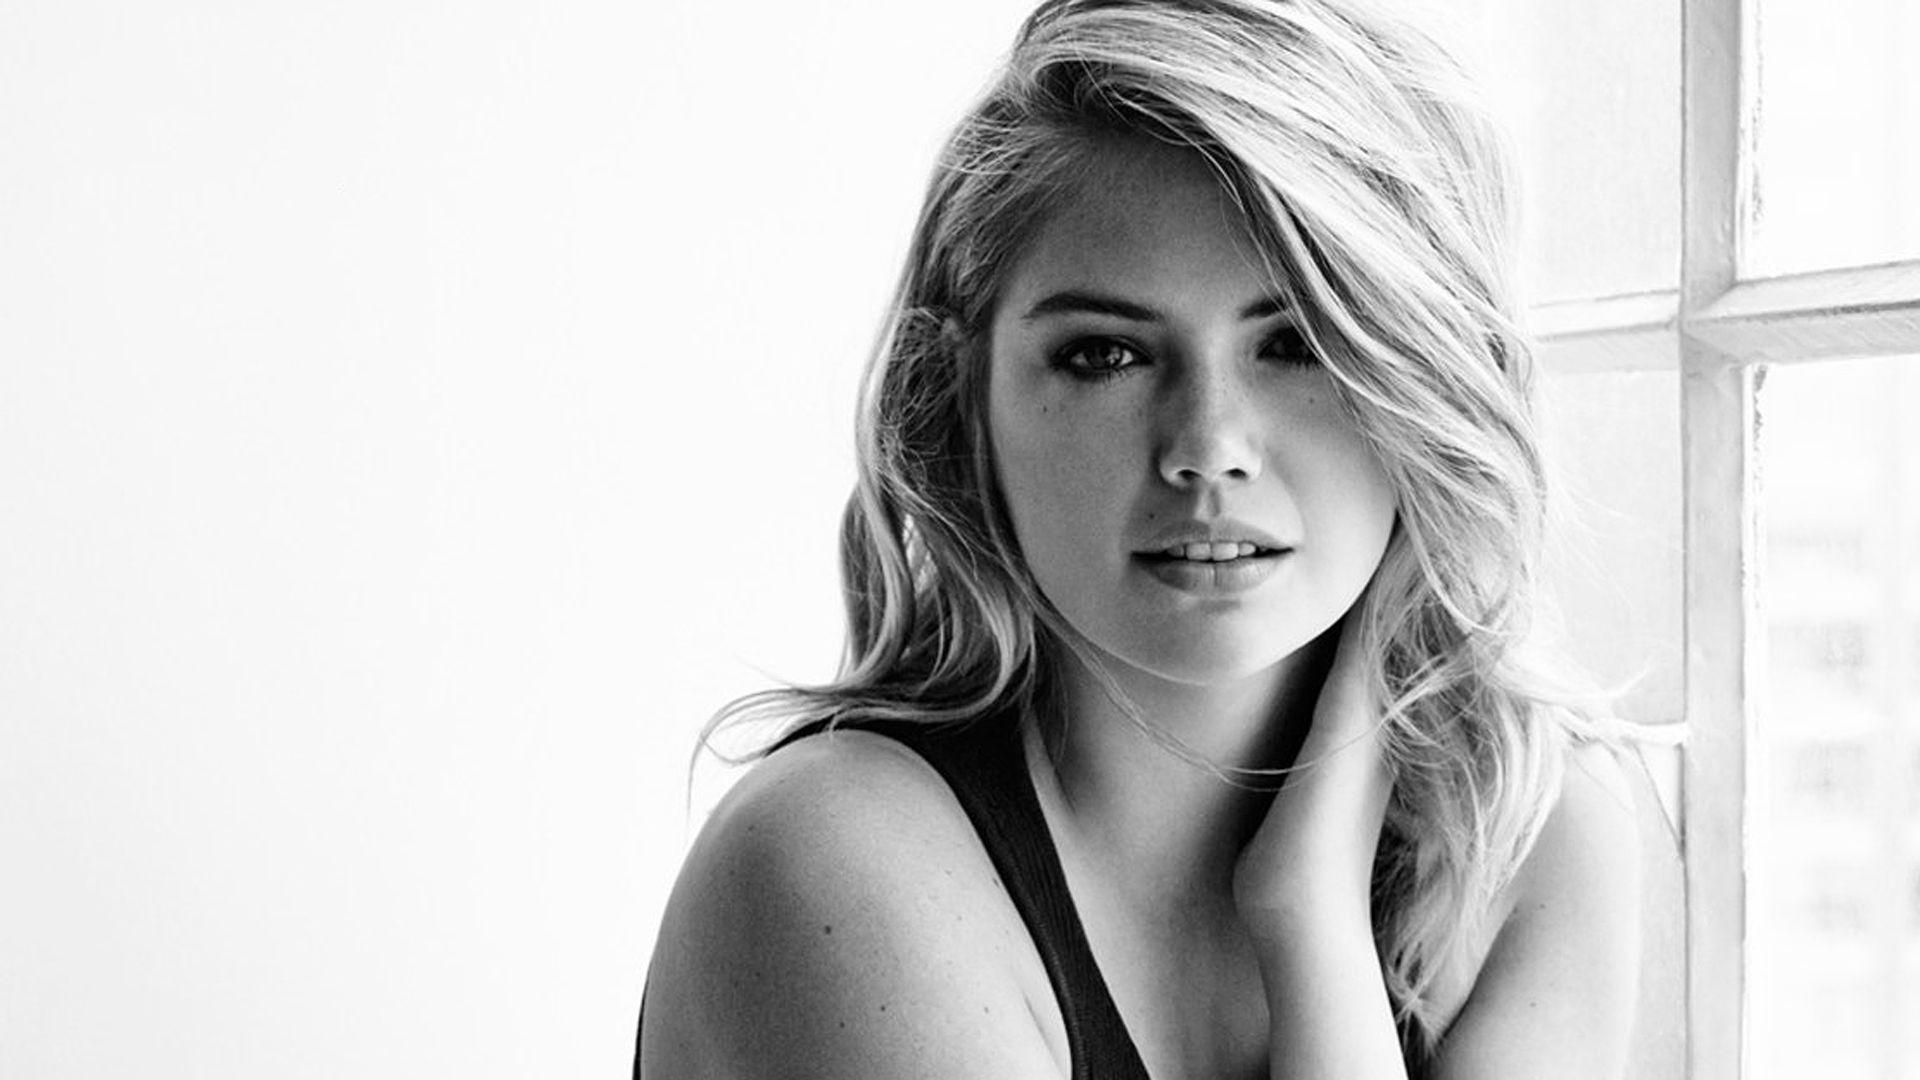 Kate Upton Wallpaper, Awesome Kate Upton Picture and Wallpaper